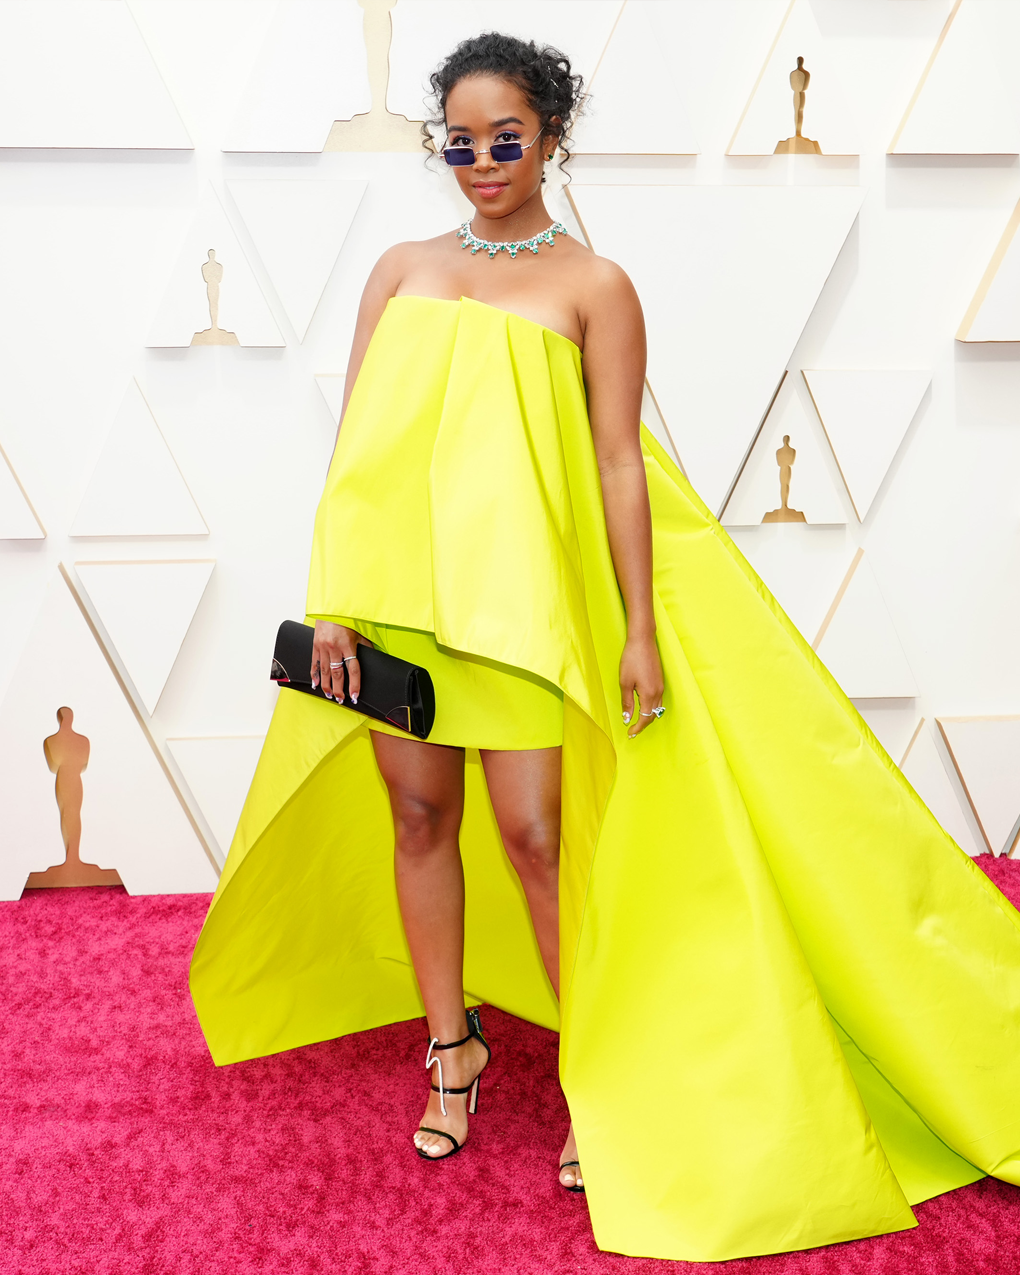 Here are the best looks from the 2022 Oscars red carpet